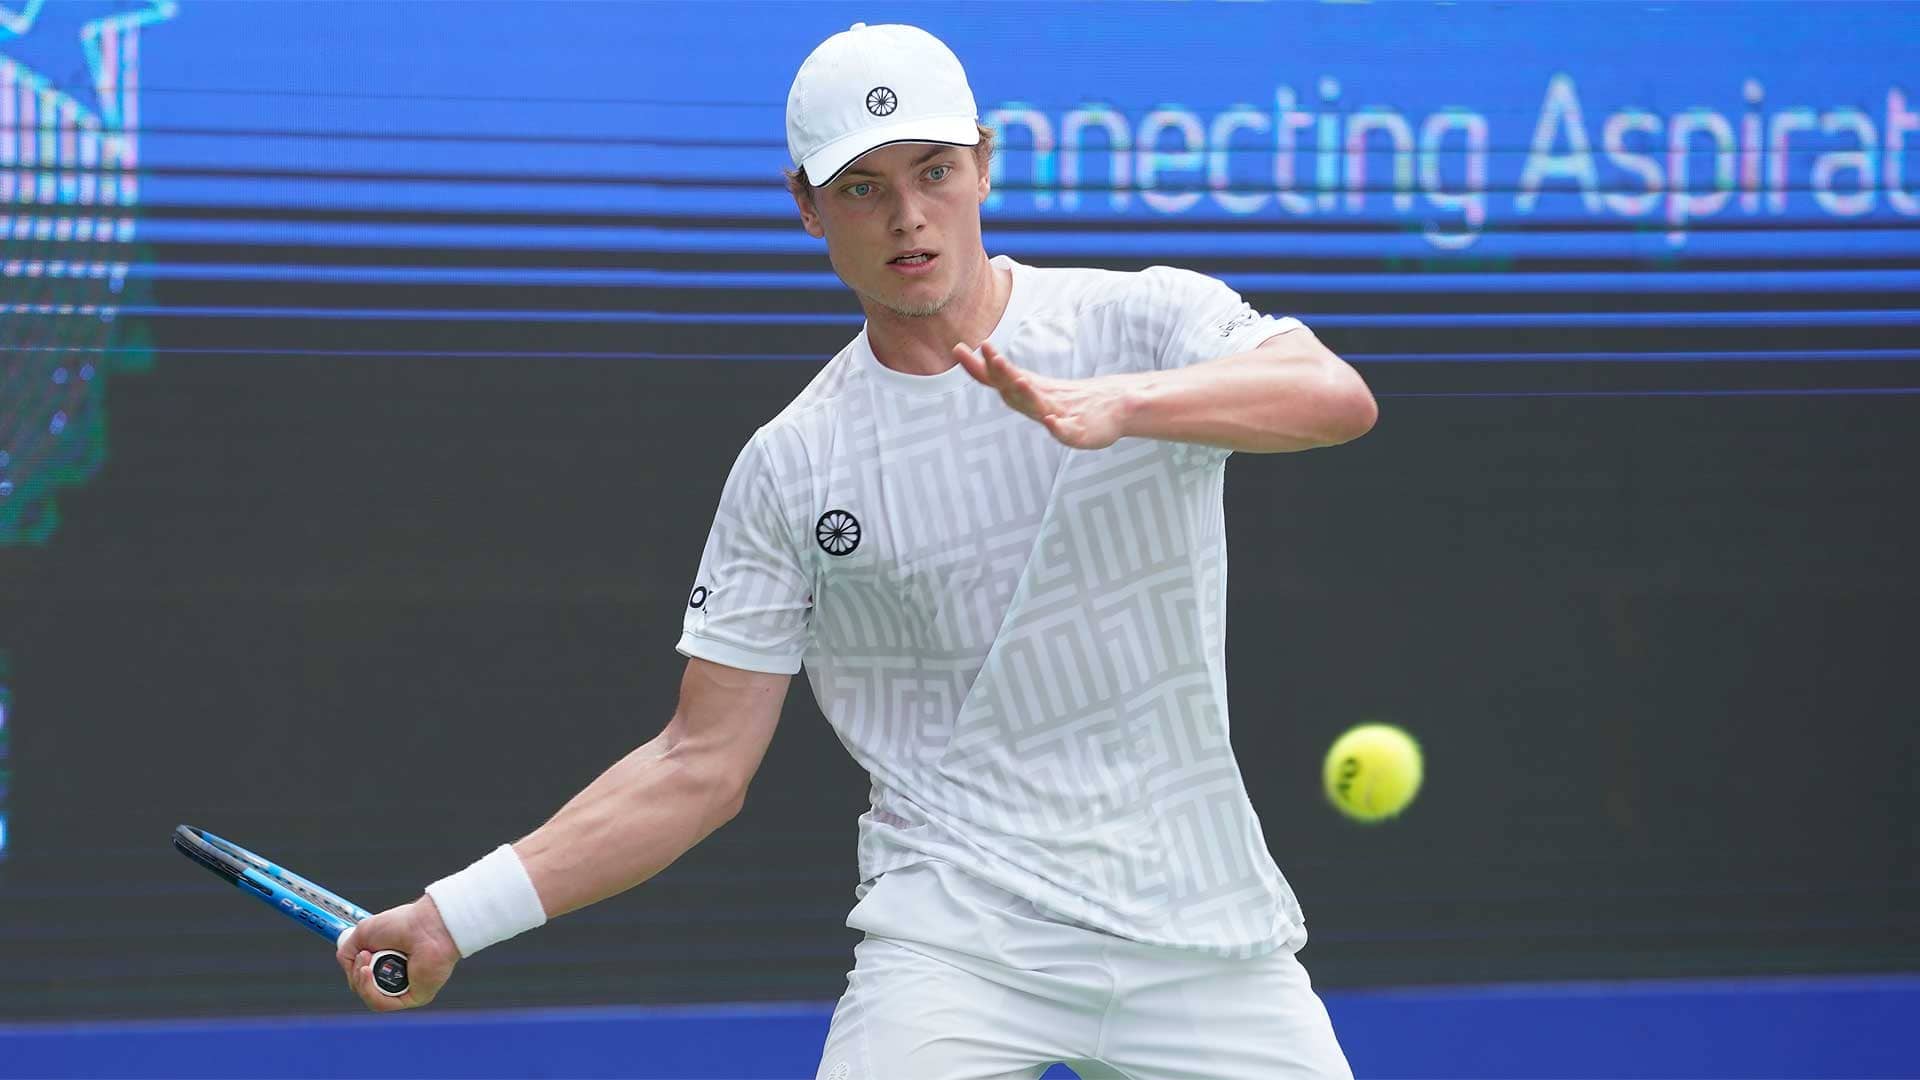 Tim van Rijthoven became the third Dutchman into the second round of the Tata Open Maharashtra in Pune on Tuesday with a first-round victory against Radu Albot